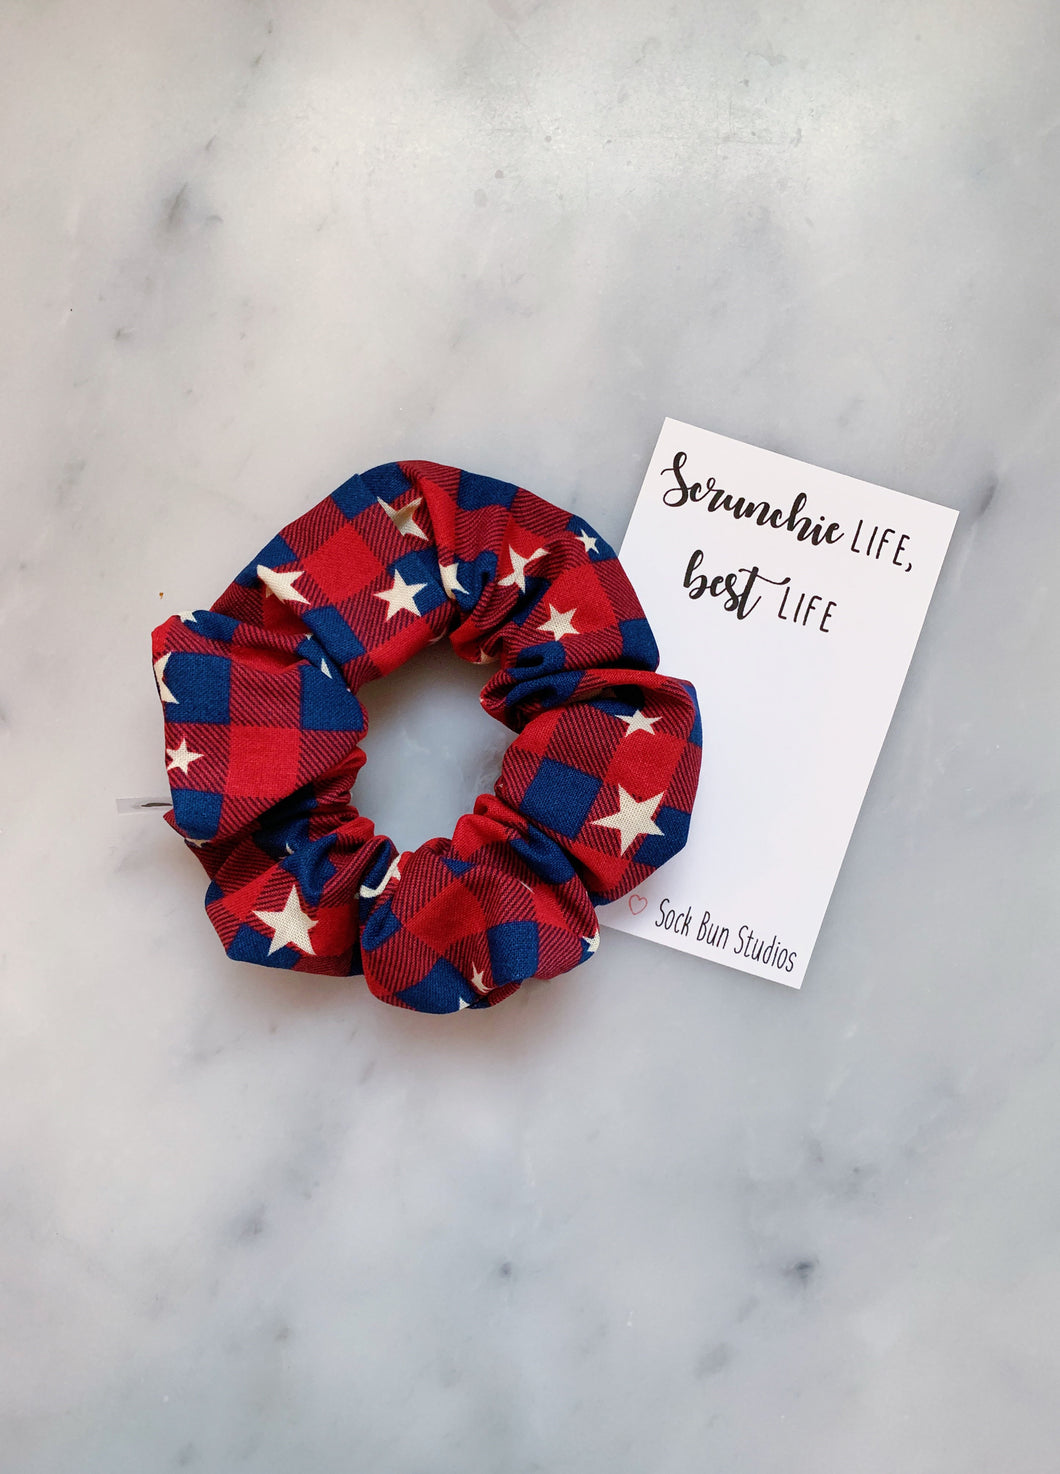 Charity Causes Mission 22 Scrunchie